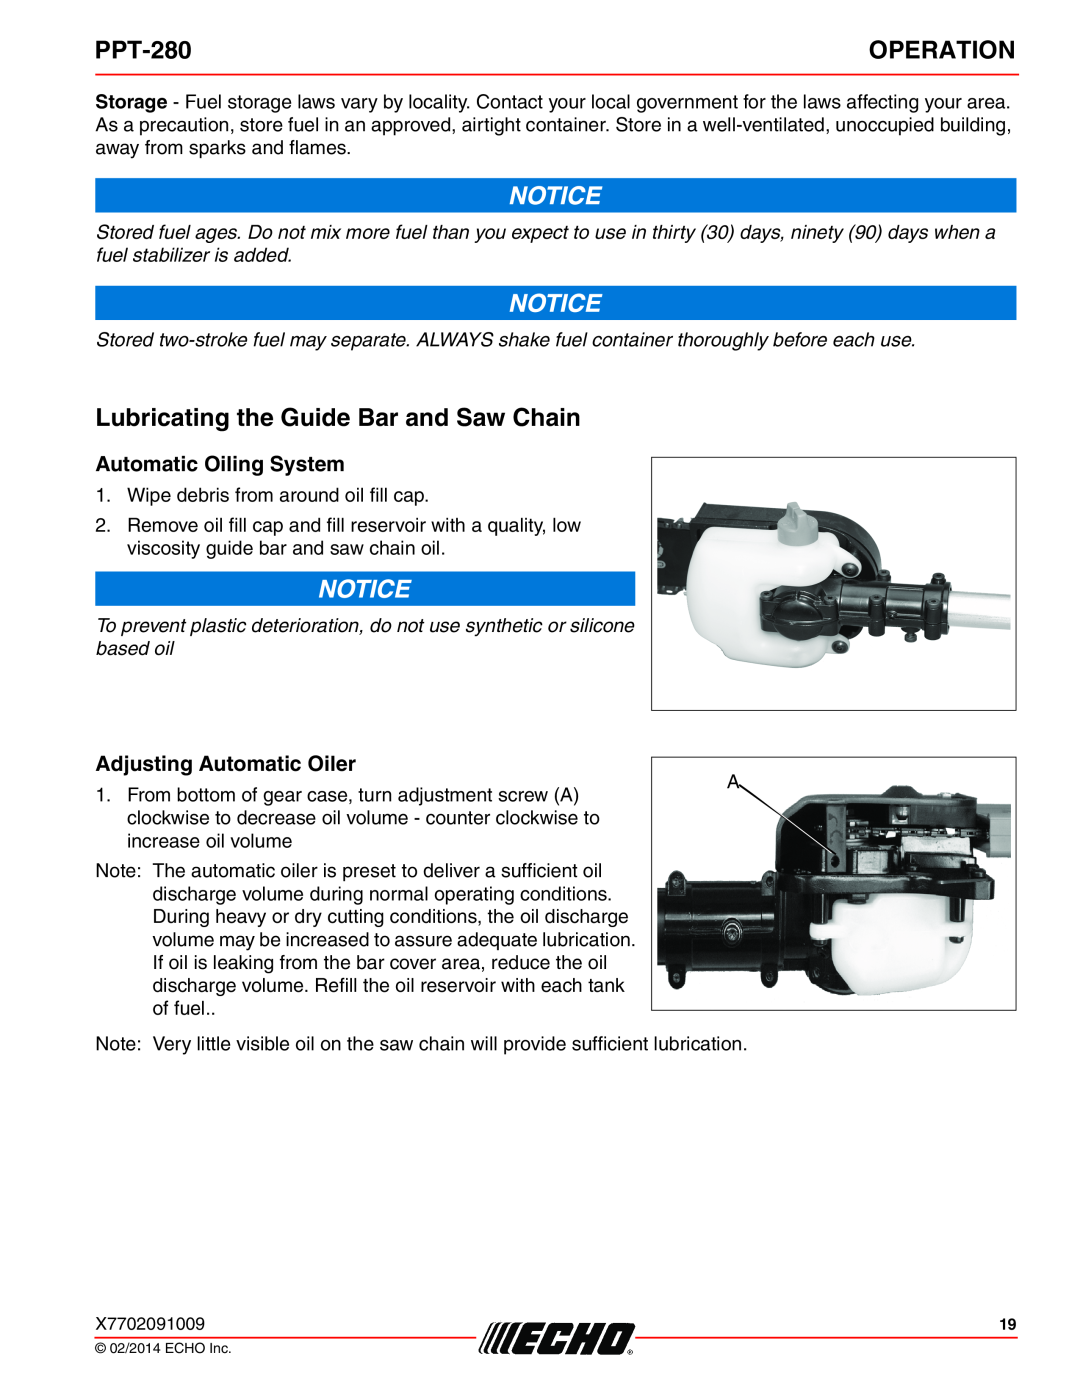 Echo PPT-280 Lubricating the Guide Bar and Saw Chain, Automatic Oiling System, Adjusting Automatic Oiler, Operation 